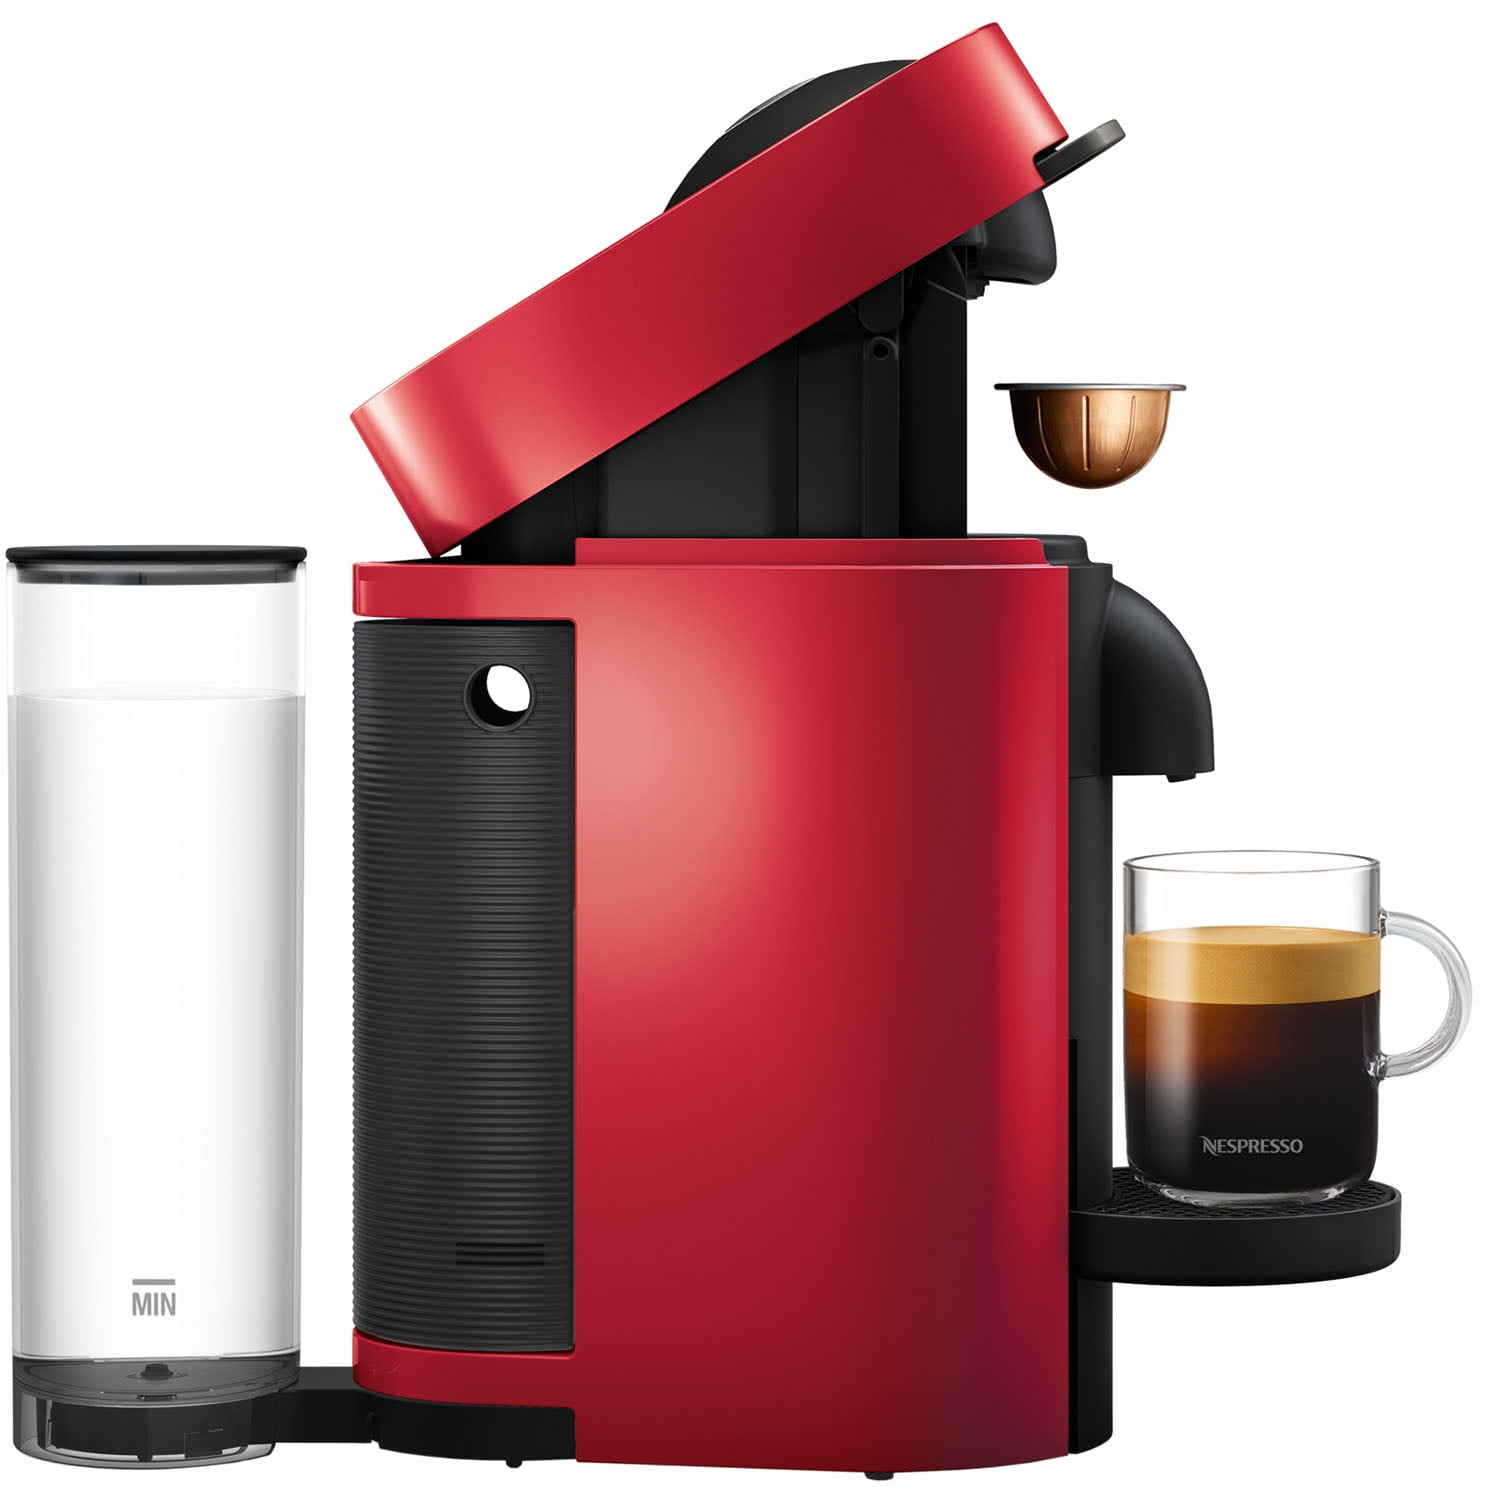 Next Coffee and Espresso Maker in Red plus Aeroccino3 Milk Frother